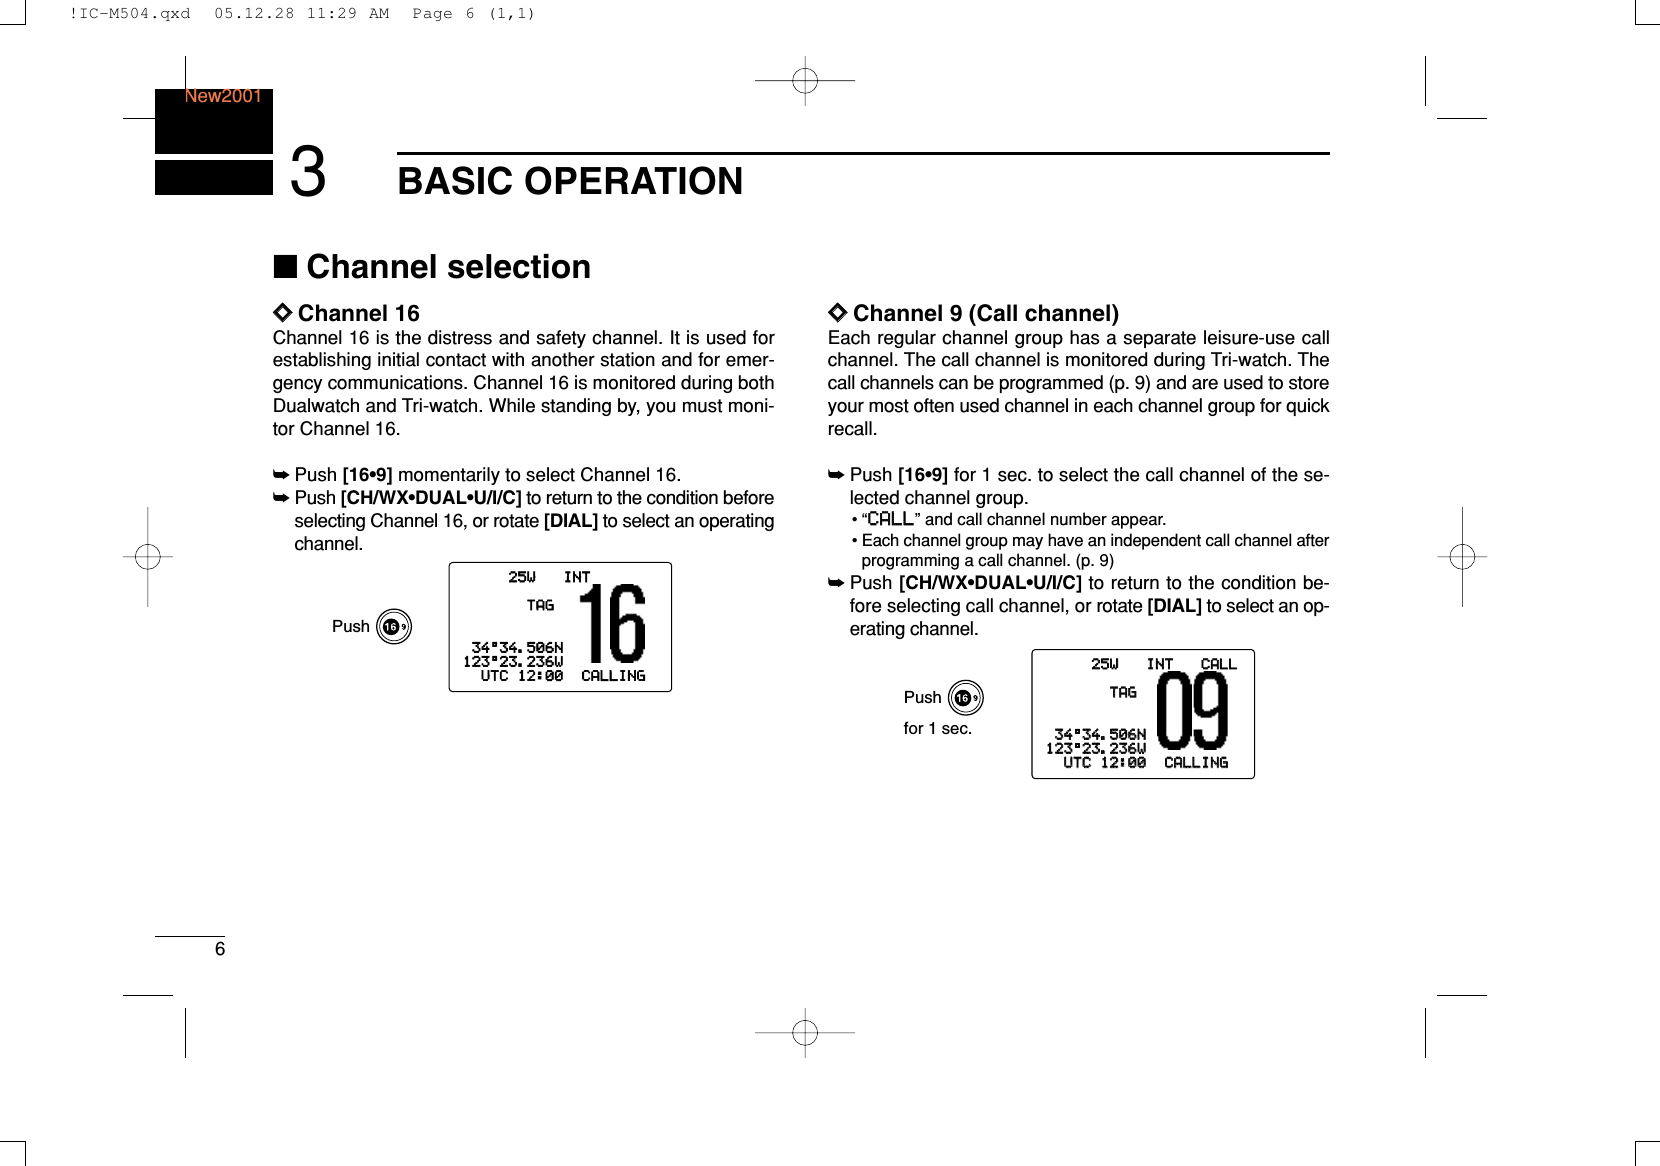 6BASIC OPERATIONNew20013■Channel selectionïïChannel 16Channel 16 is the distress and safety channel. It is used forestablishing initial contact with another station and for emer-gency communications. Channel 16 is monitored during bothDualwatch and Tri-watch. While standing by, you must moni-tor Channel 16.➥Push [16•9] momentarily to select Channel 16.➥Push [CH/WX•DUAL•U/I/C] to return to the condition beforeselecting Channel 16, or rotate [DIAL] to select an operatingchannel.ïïChannel 9 (Call channel)Each regular channel group has a separate leisure-use callchannel. The call channel is monitored during Tri-watch. Thecall channels can be programmed (p. 9) and are used to storeyour most often used channel in each channel group for quickrecall.➥Push [16•9] for 1 sec. to select the call channel of the se-lected channel group.•“CCAALLLL” and call channel number appear.• Each channel group may have an independent call channel afterprogramming a call channel. (p. 9)➥Push [CH/WX•DUAL•U/I/C] to return to the condition be-fore selecting call channel, or rotate [DIAL] to select an op-erating channel.25W25W INTINT CALLCALLTAGTAG3434°34.506N34.506N123123°23.236W23.236WUTCUTC 1212:00:00 CALLINGCALLINGPushfor 1 sec.25W INTTAG34°34.506N123°23.236WUTC 12:00 CALLINGPush!IC-M504.qxd  05.12.28 11:29 AM  Page 6 (1,1)